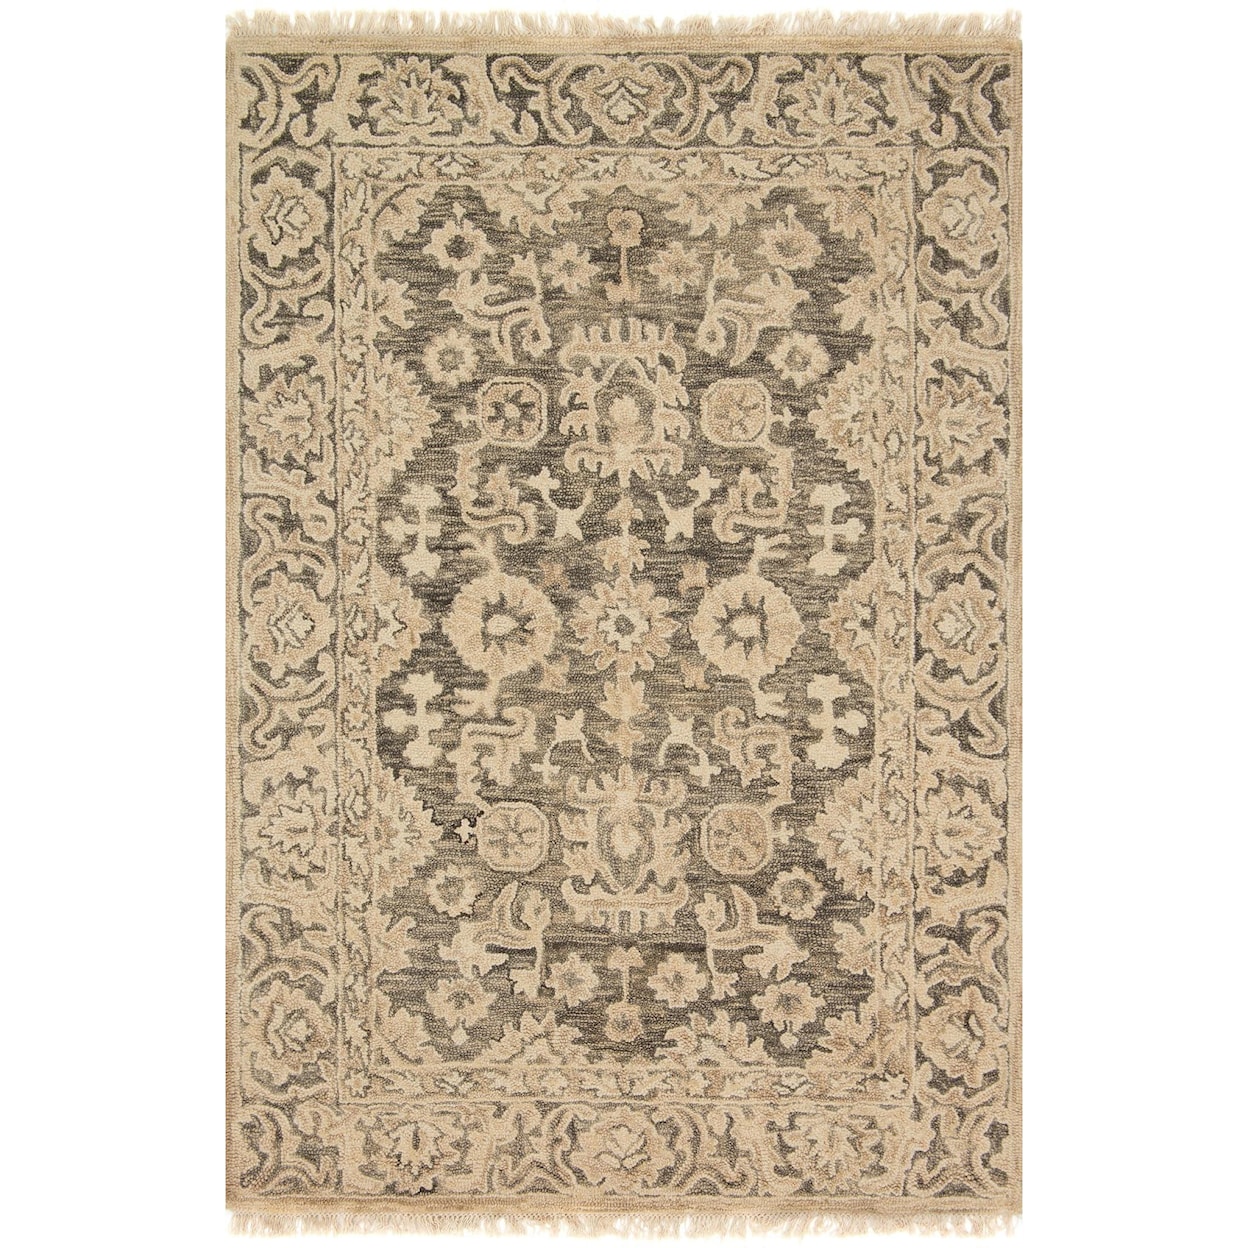 Magnolia Home by Joanna Gaines for Loloi Hanover 7' 9" x 9' 9" Rectangle Rug